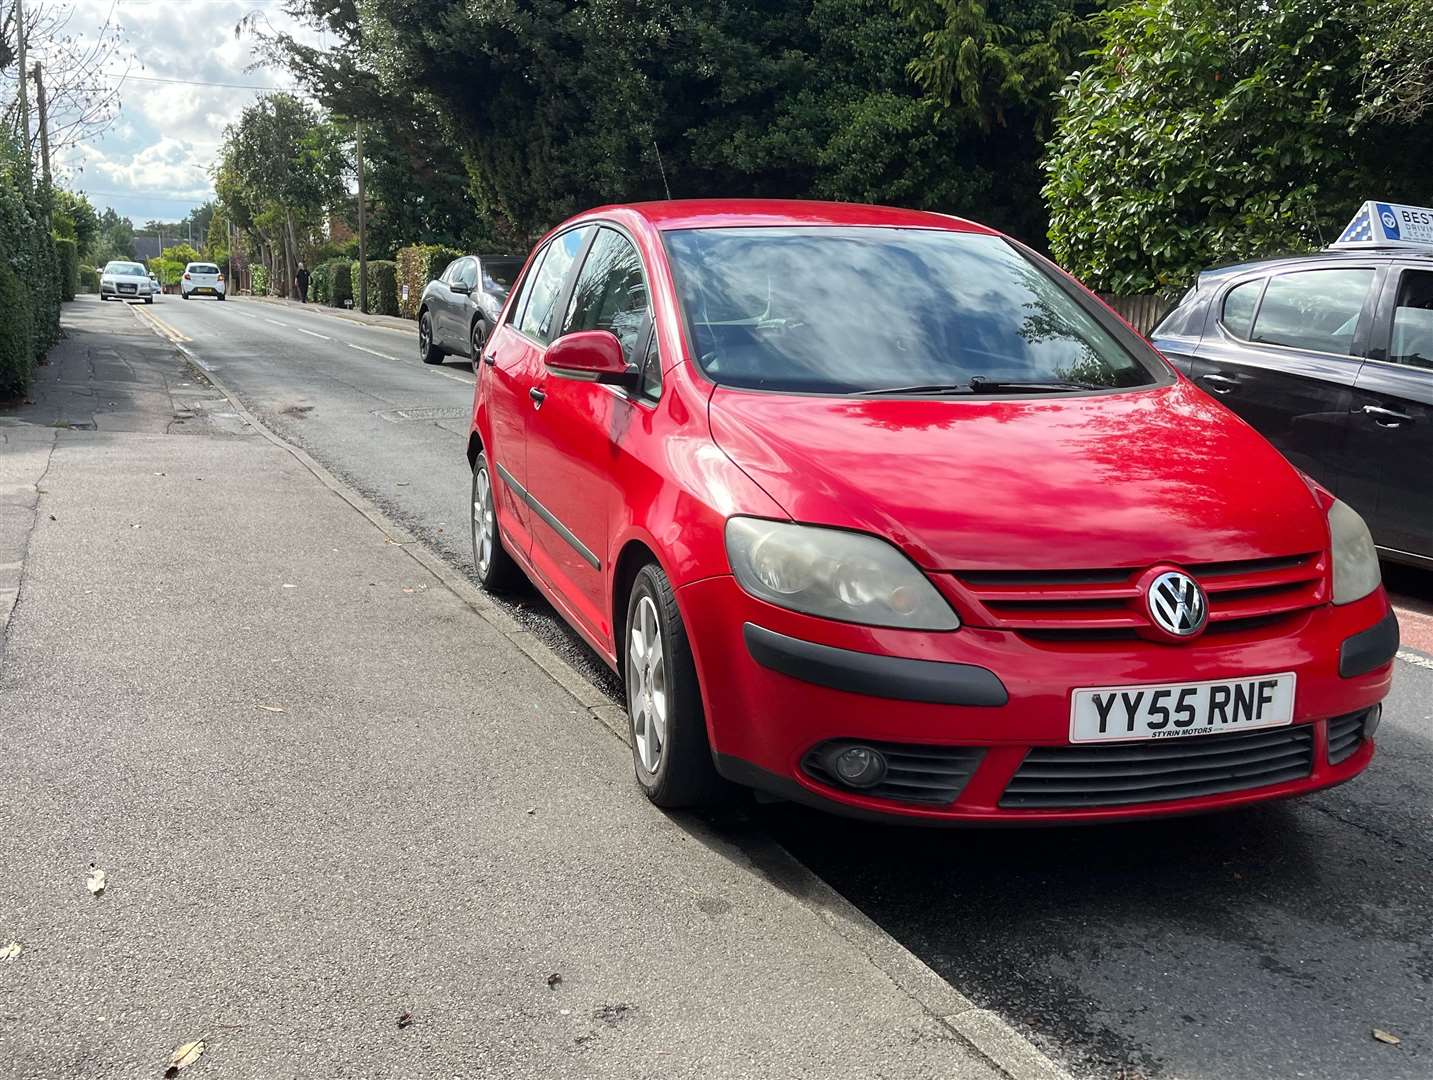 A red VW has been left at the roadside for weeks